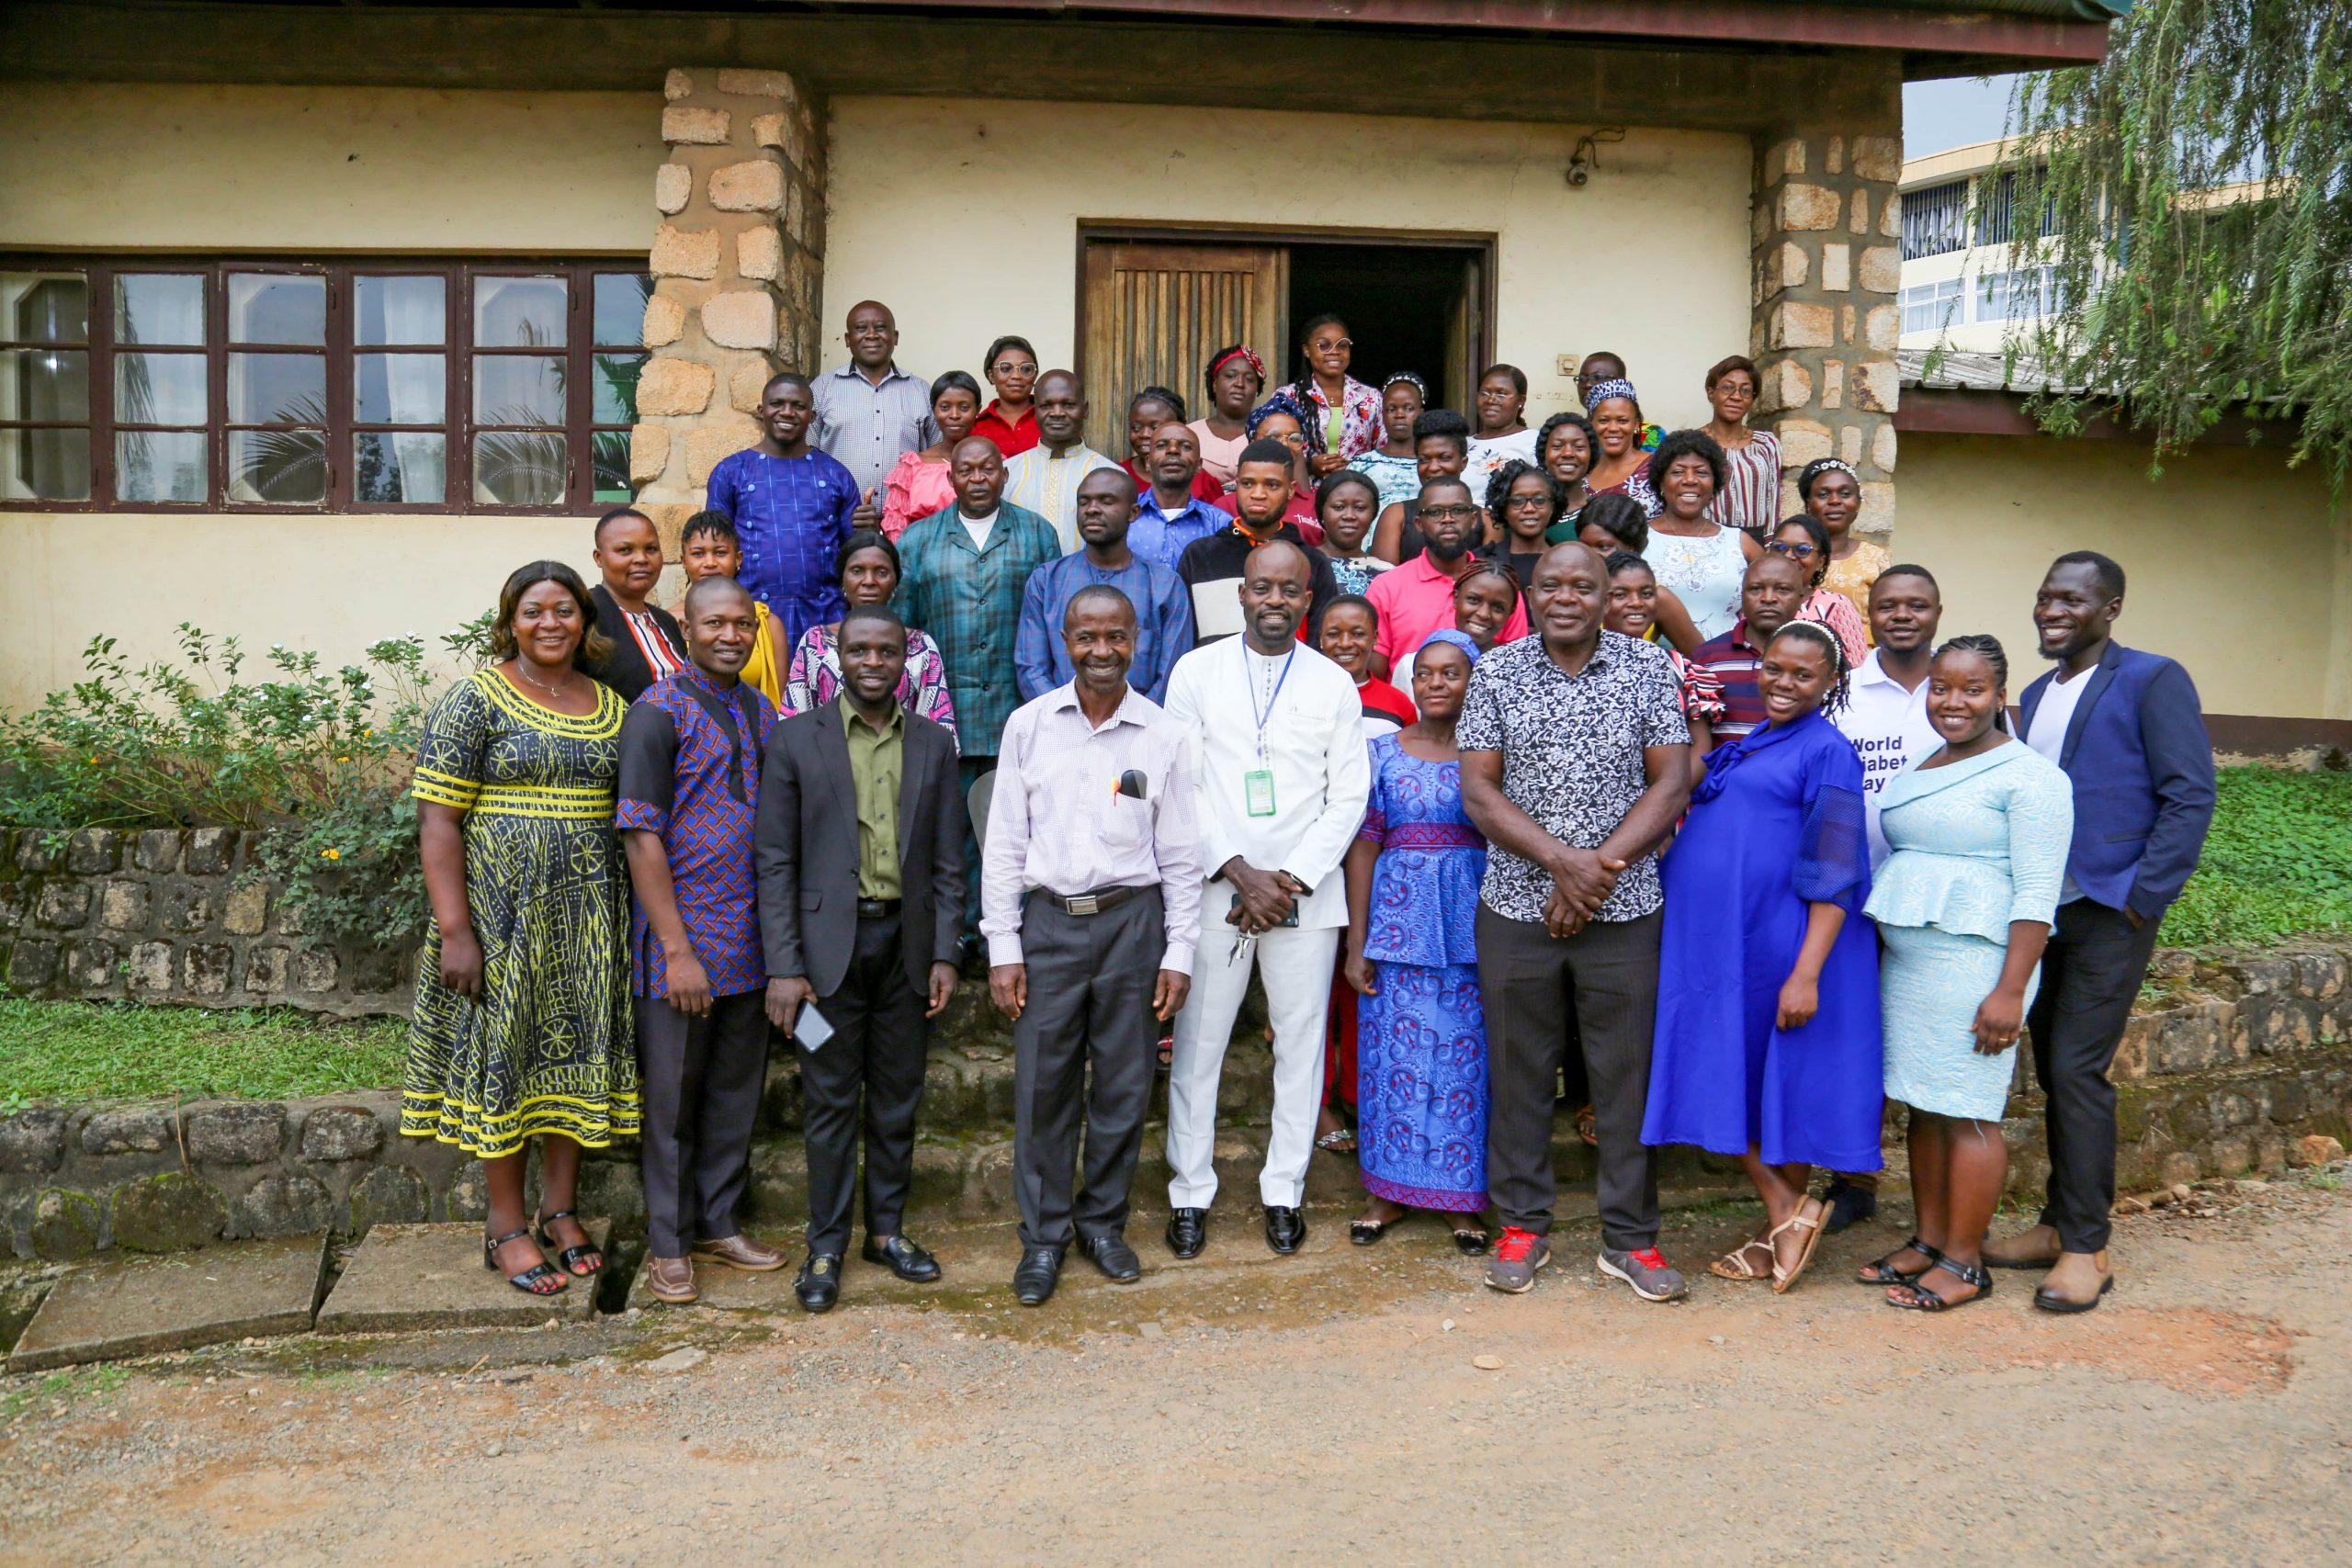 Leaders and Facilitators pose with KYN Nurses and Community Mobilizers